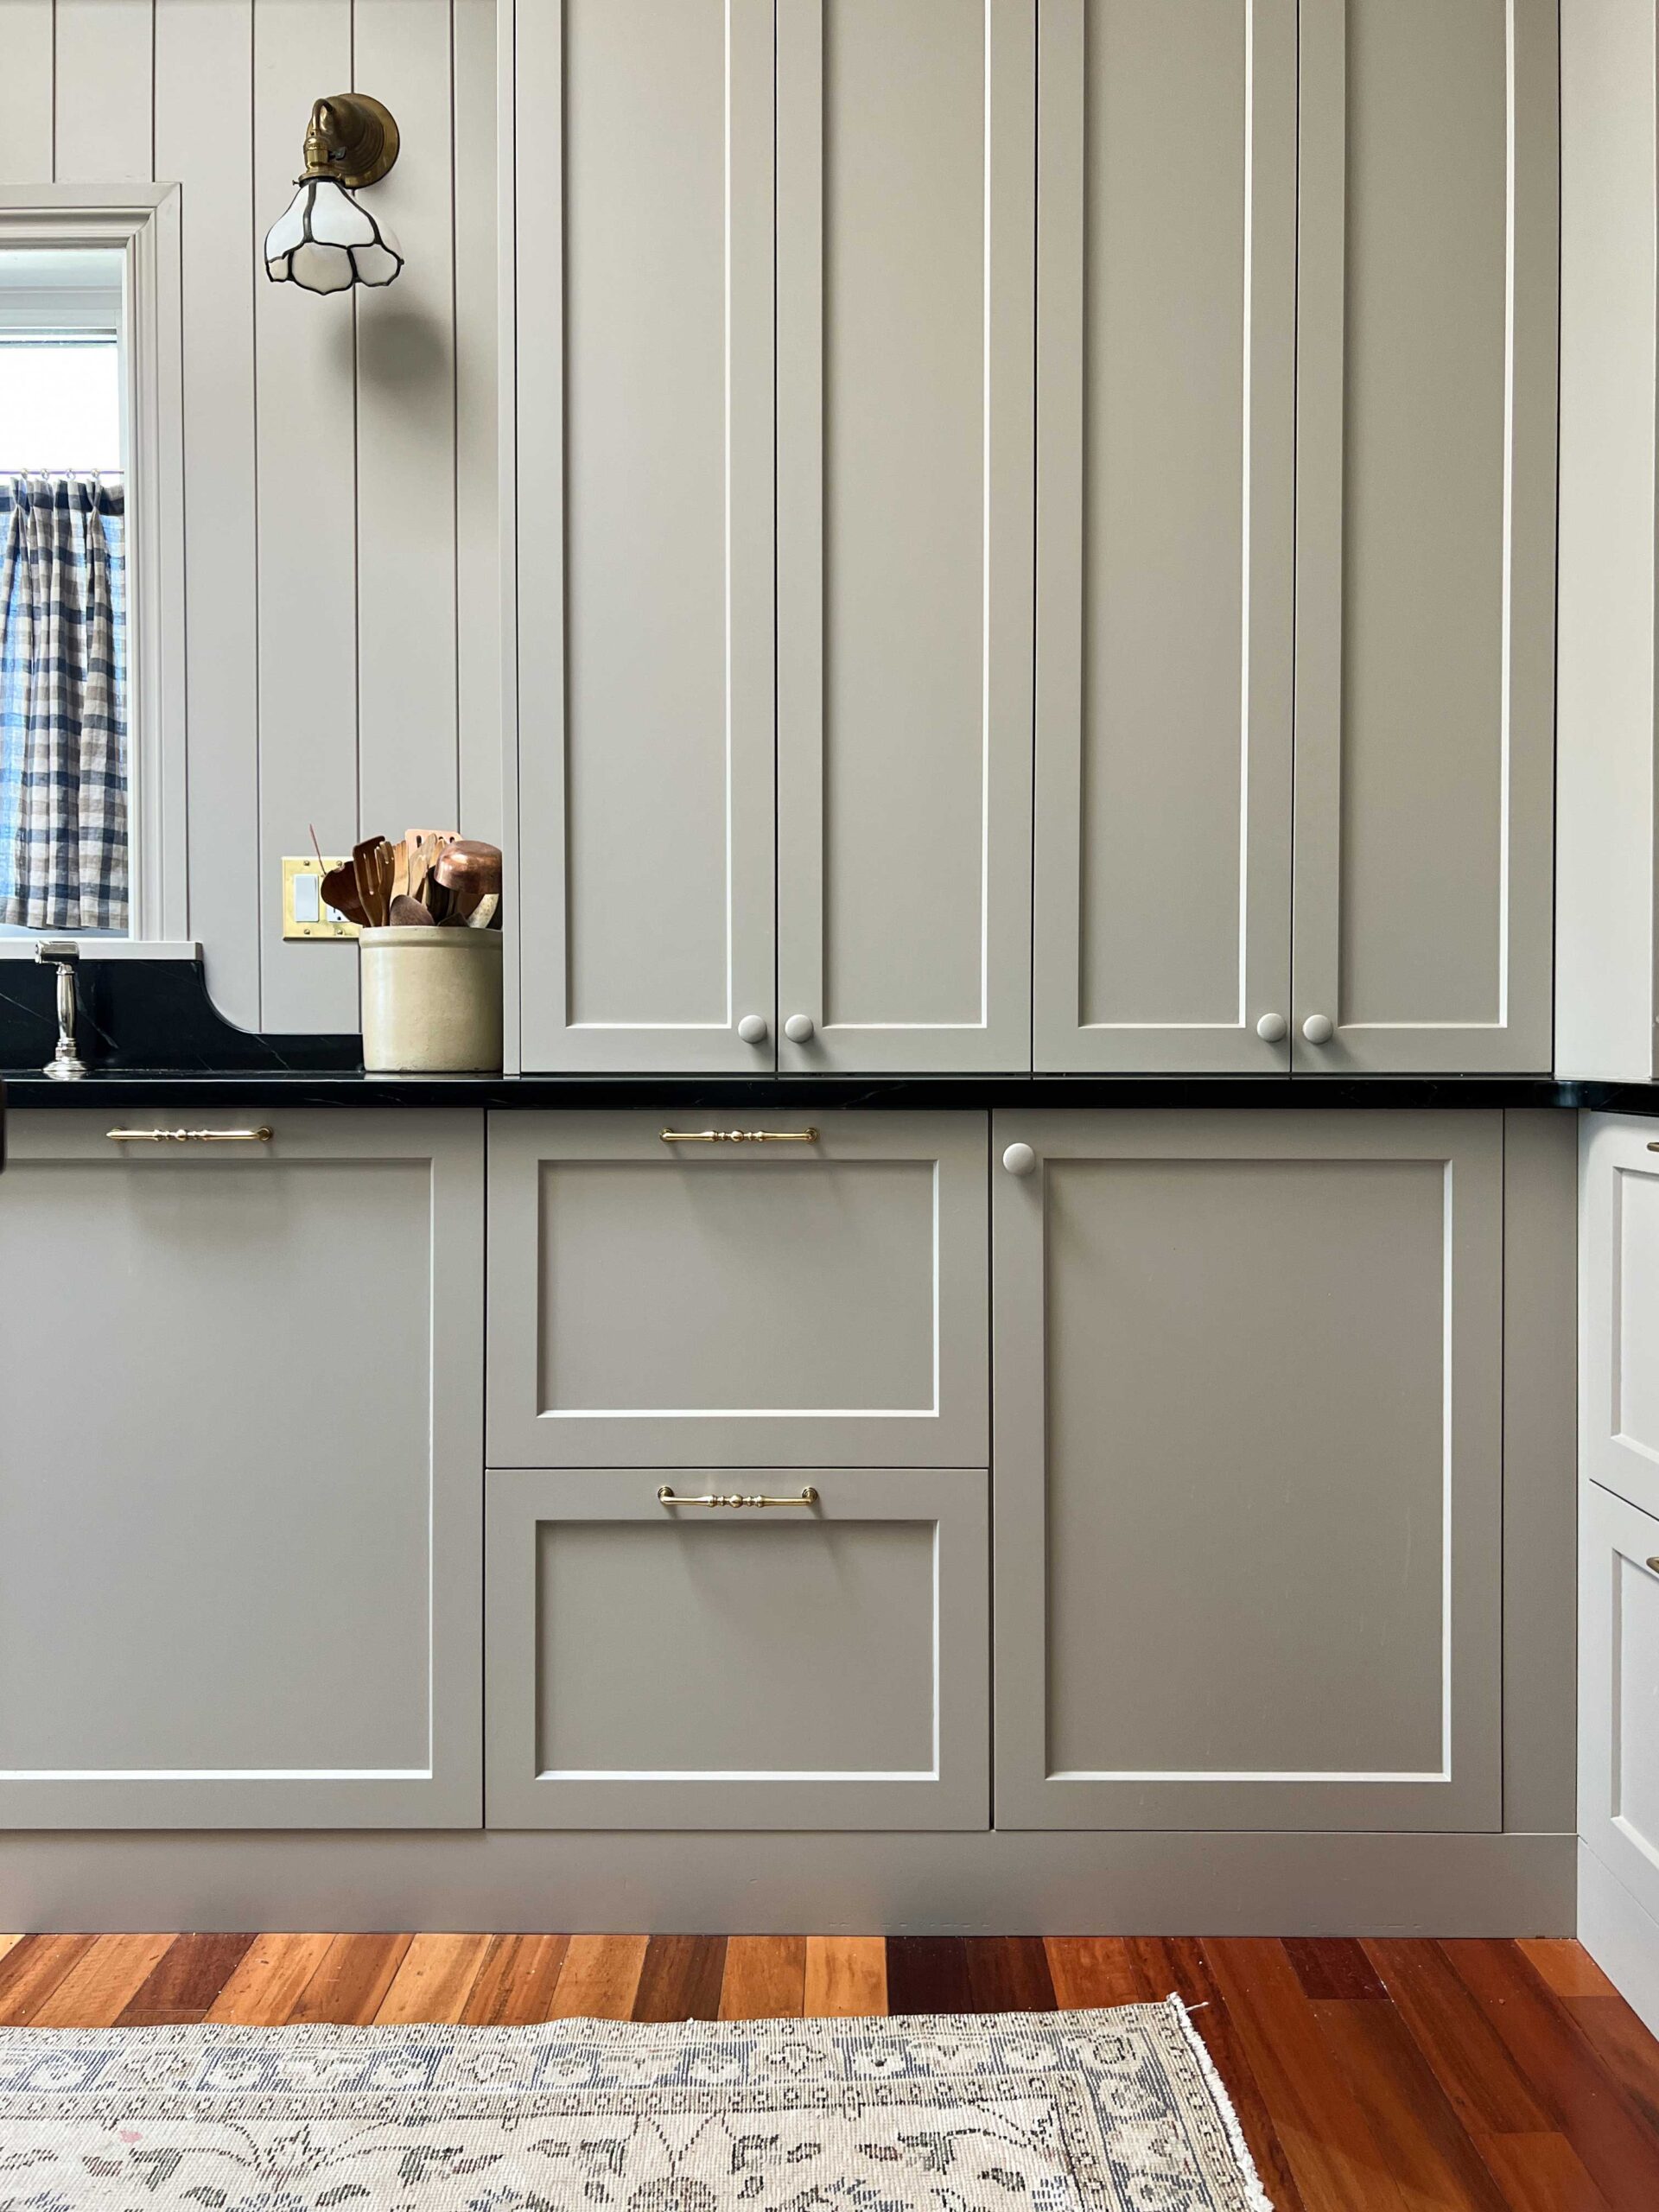 How To Pick Kitchen Hardware – The Ultimate Guide 